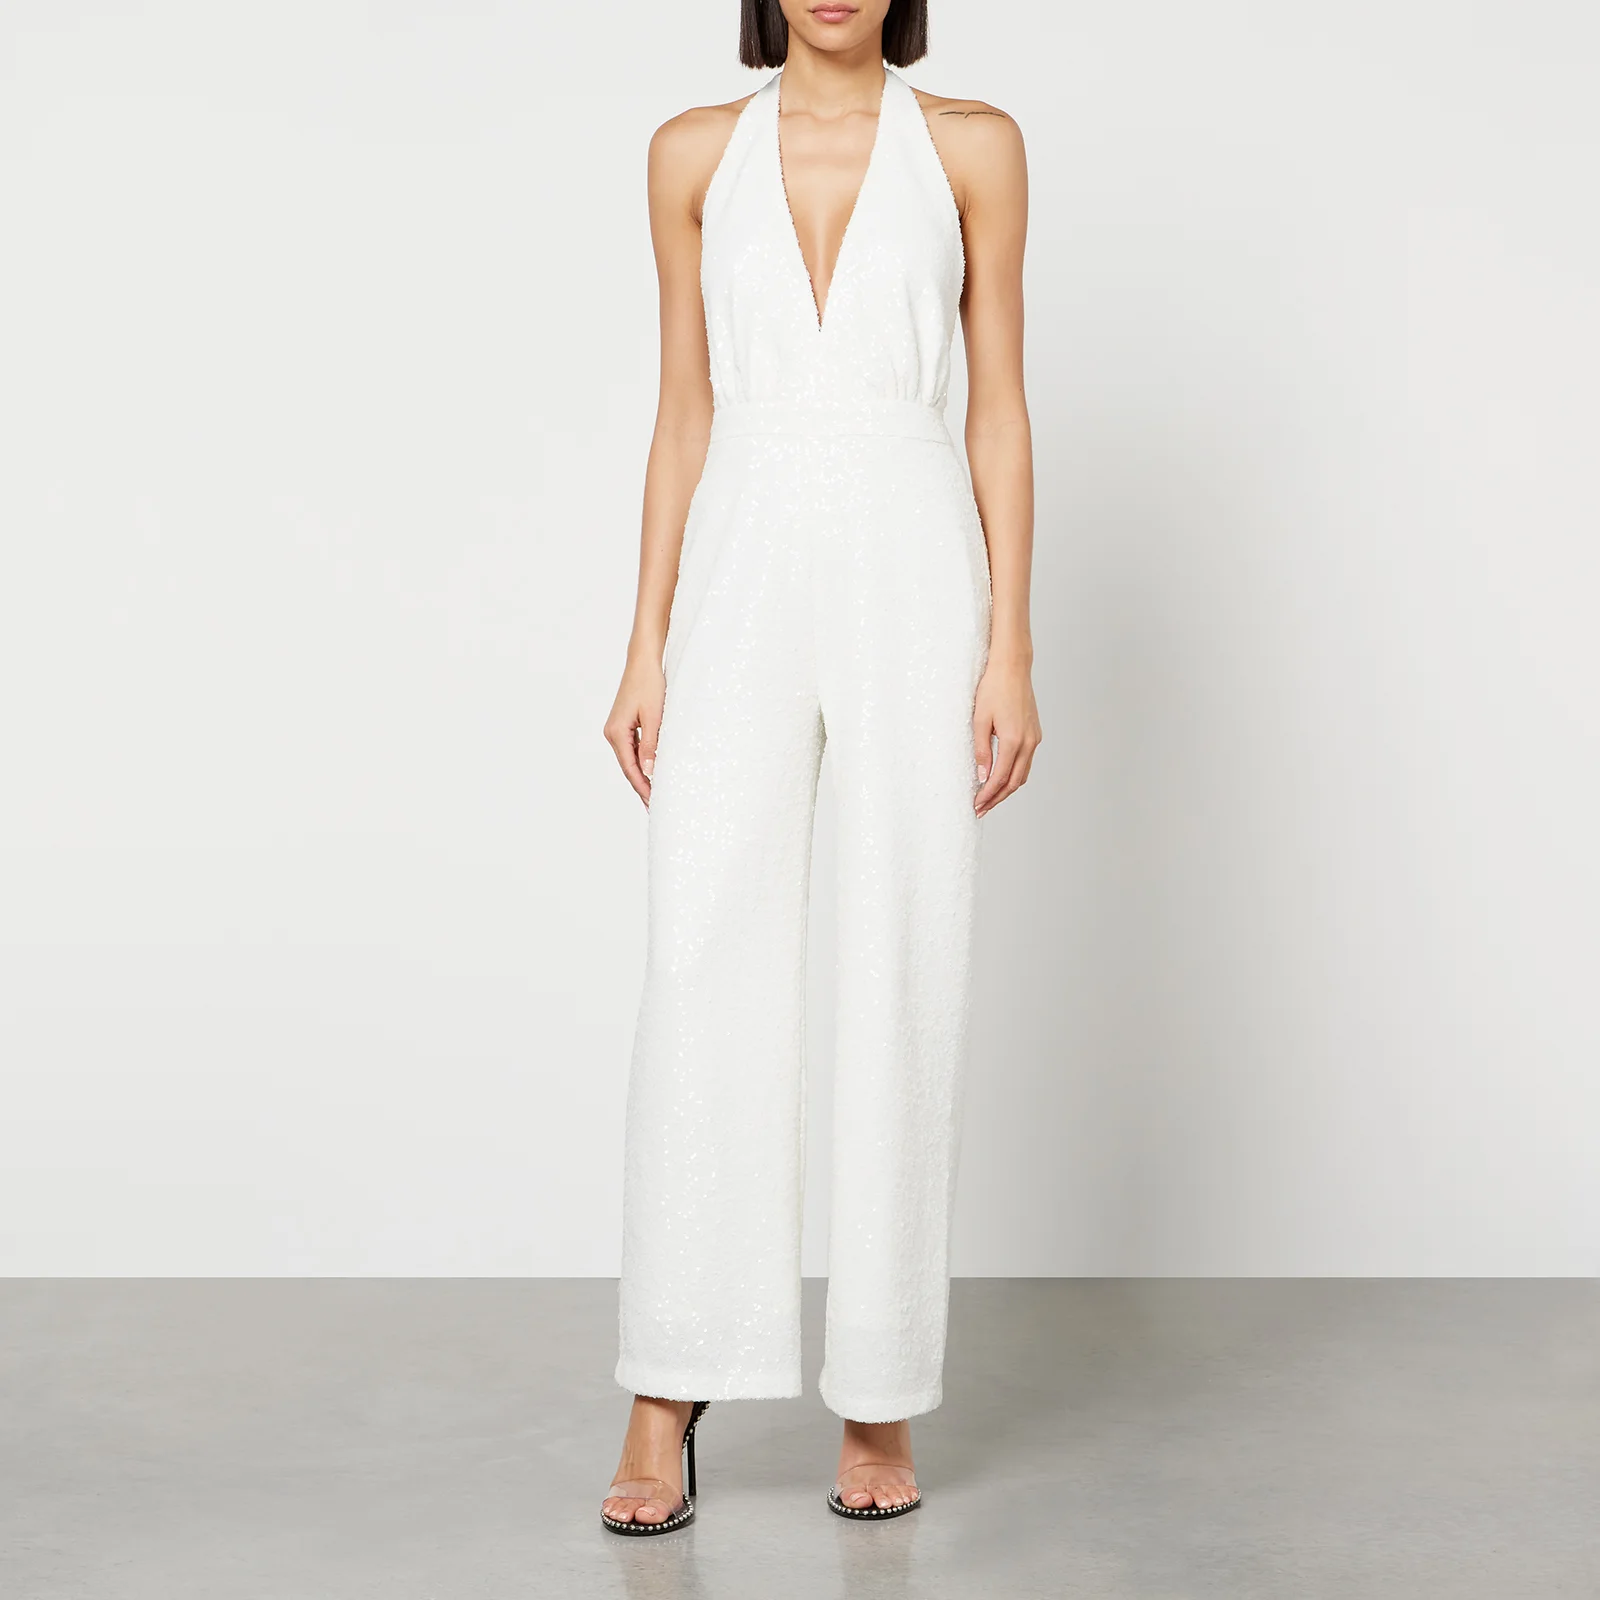 In The Mood For Love Celila Sequined Mesh Jumpsuit Image 1